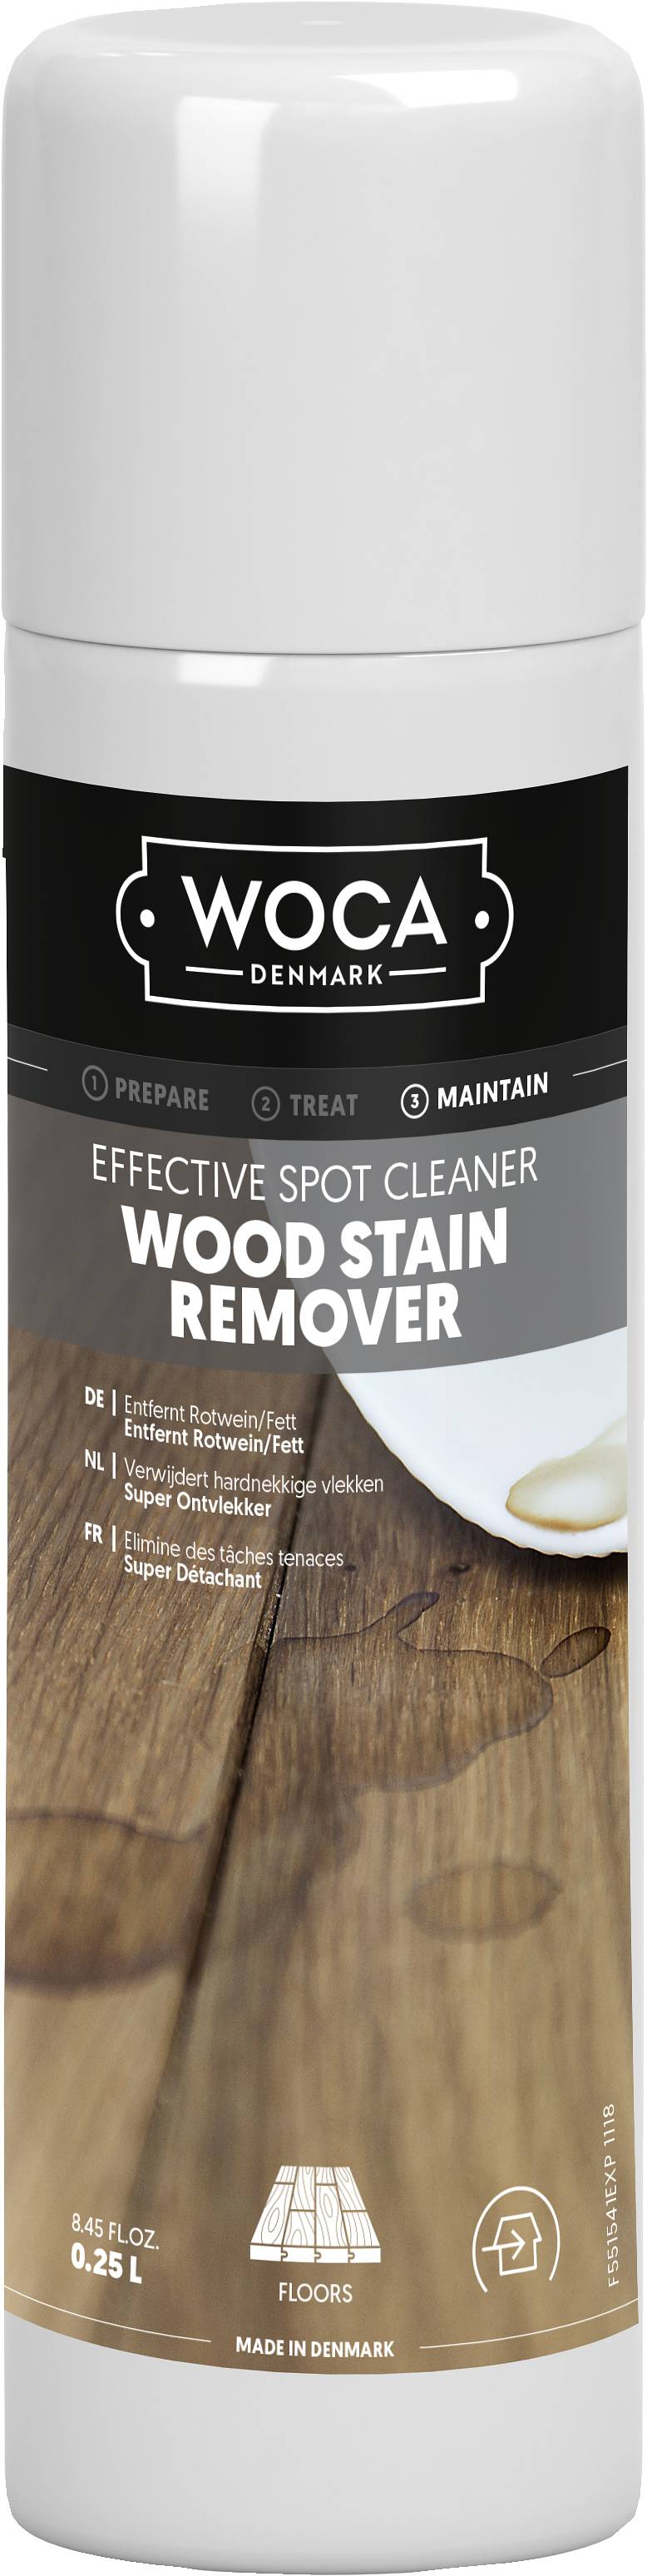 Foto: wood stain remover 0 25L 551541A